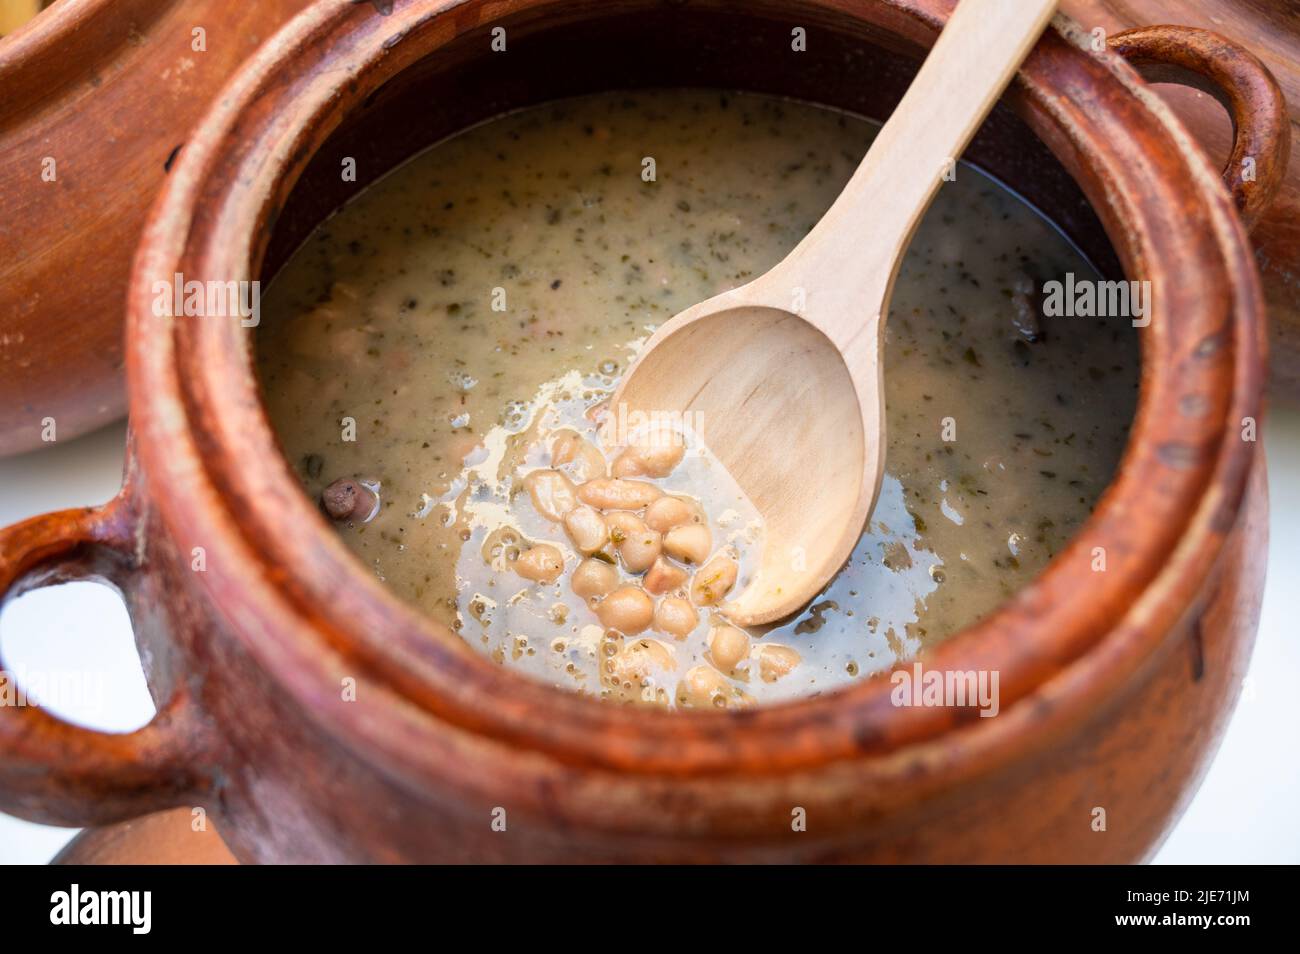 Clay pot with traditional Peruvian food called seco con frejoles Stock Photo